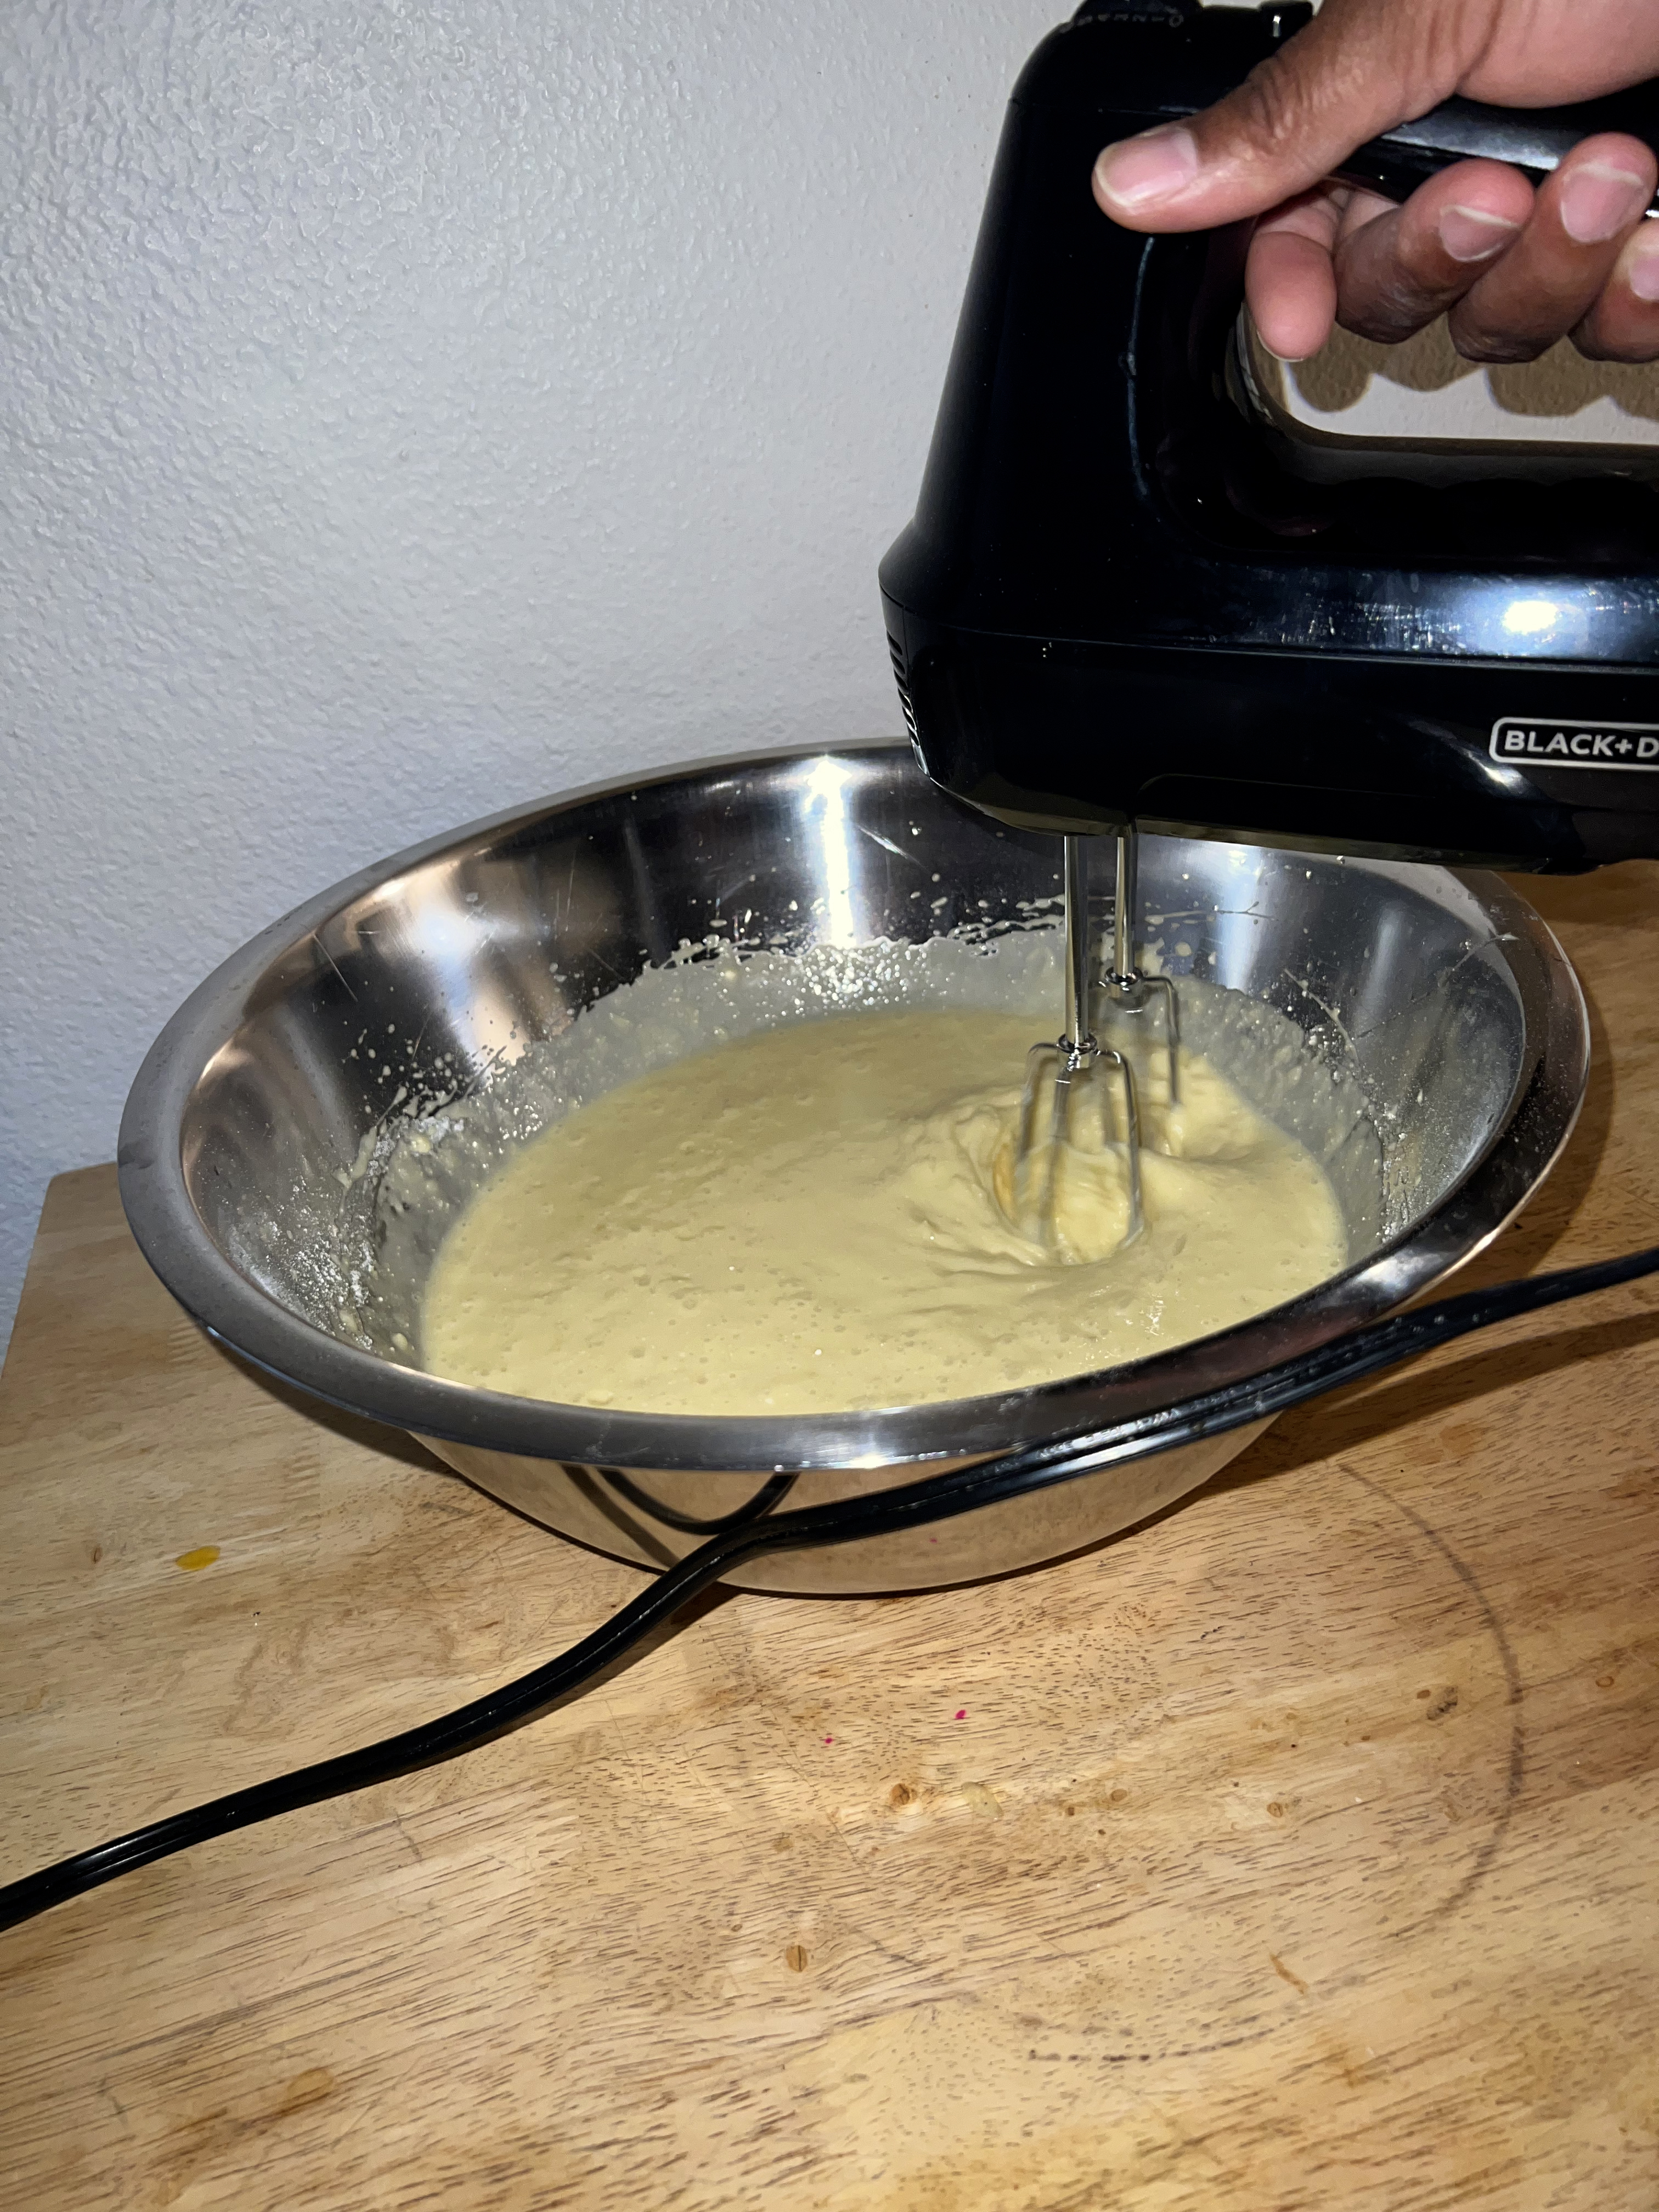 A picture of a hand blending pineapple cake mix with a blender.